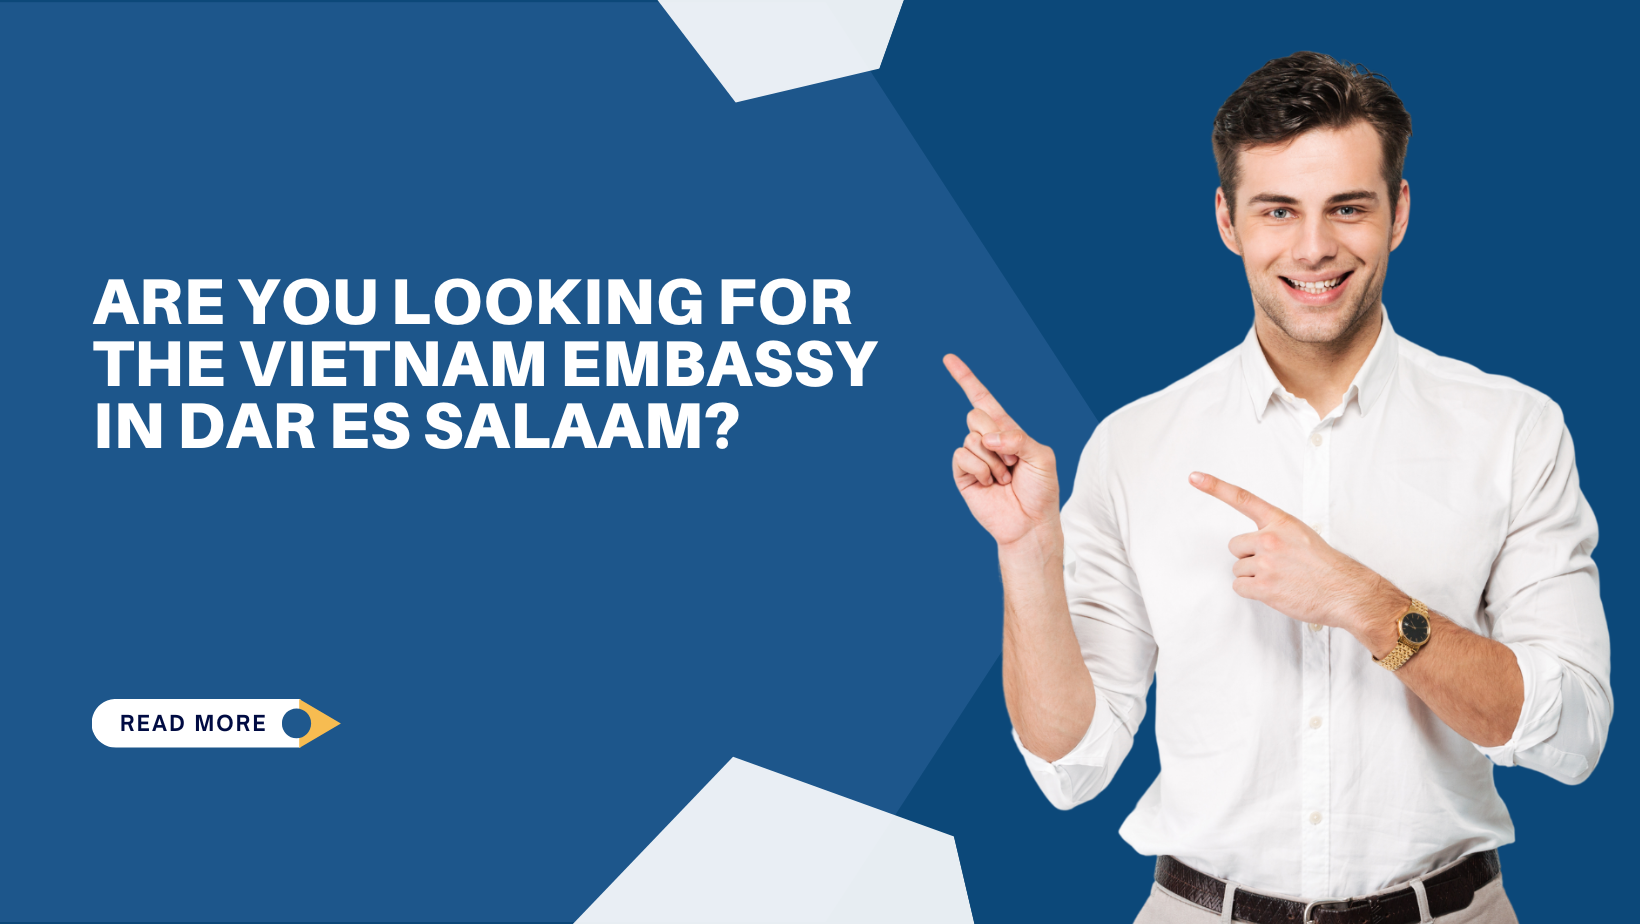 Are You Looking for the Vietnam Embassy in Dar es Salaam?